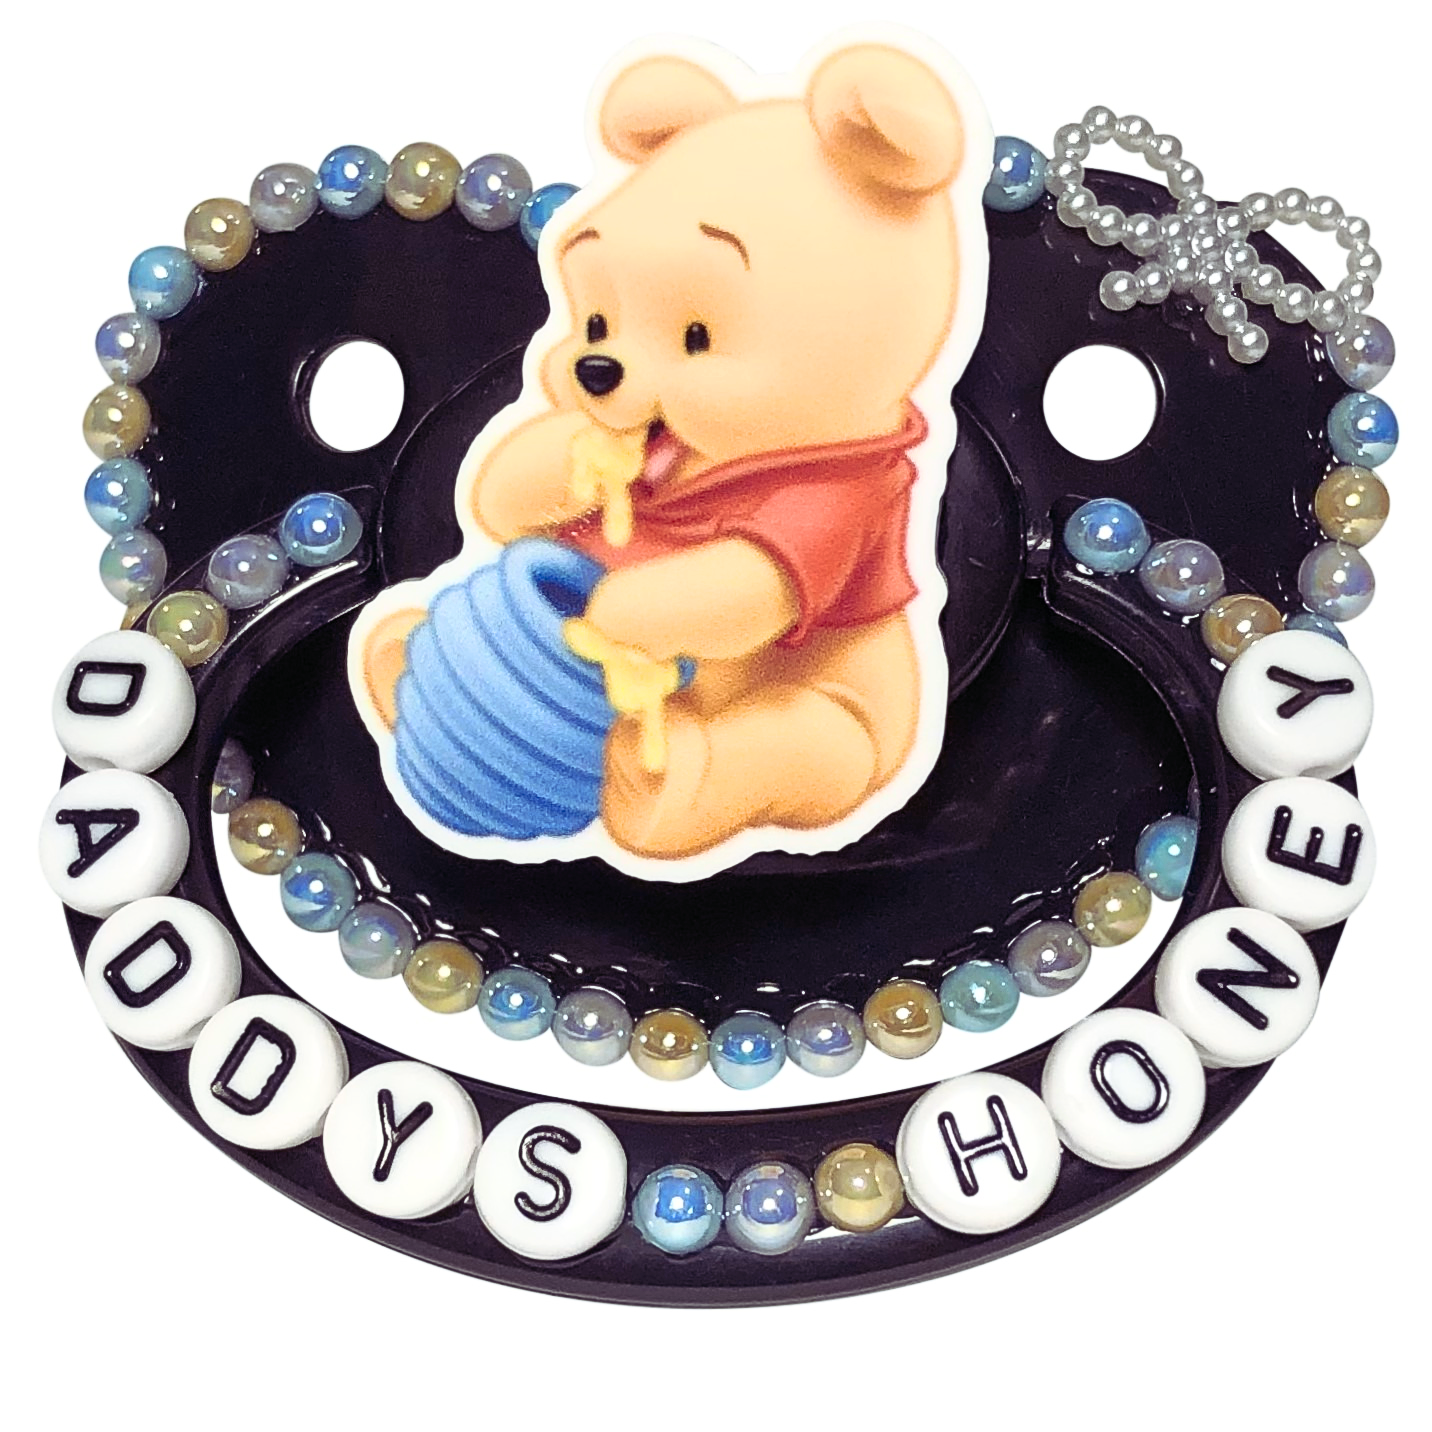 Baby Bear Pacis Adult Pacifier "Daddy's Honey" Black Winnie the Pooh Adult Paci (DDLG/ABDL)